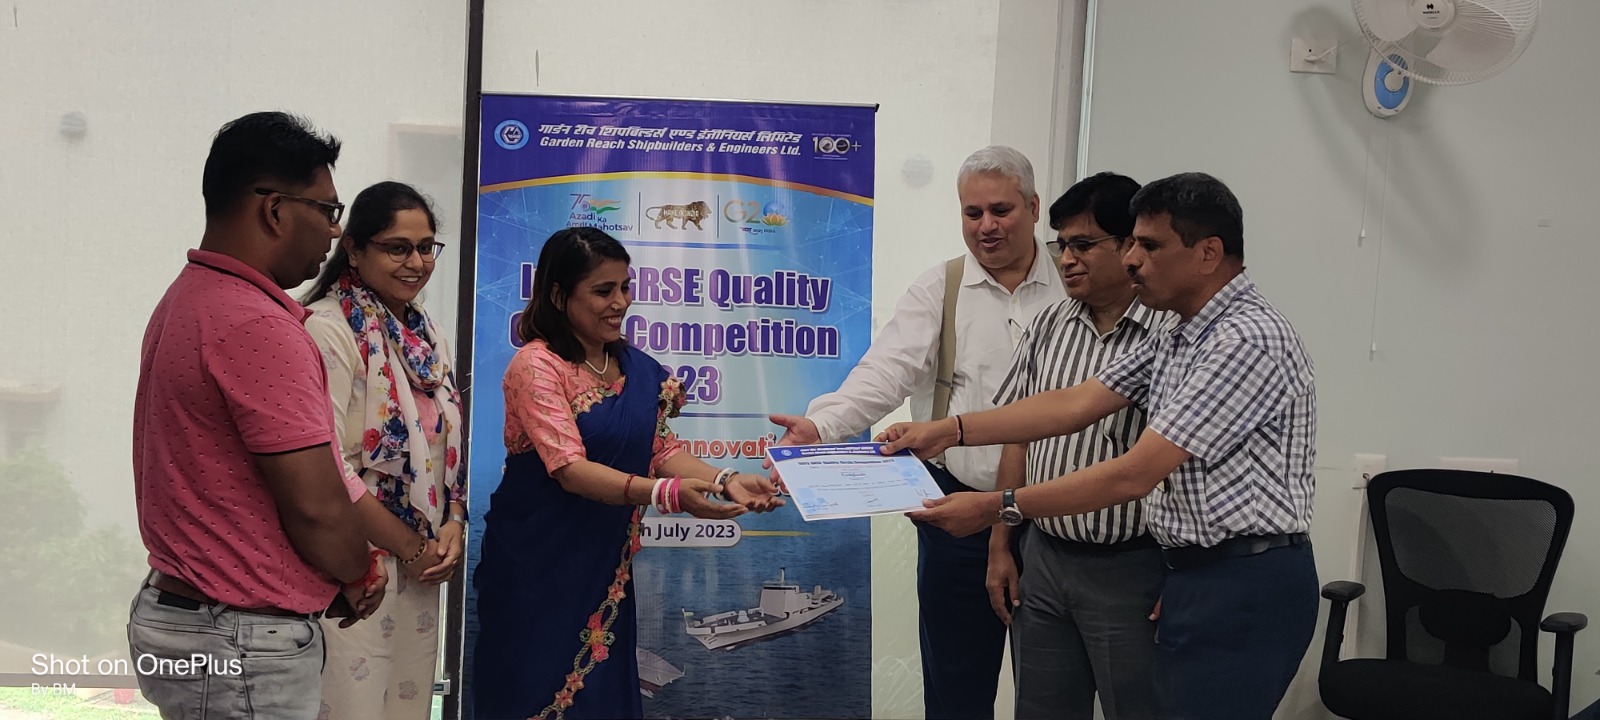 Teams for Intra GRSE Quality Circle Competition (IGQCC)-2023 on 09 Aug 23